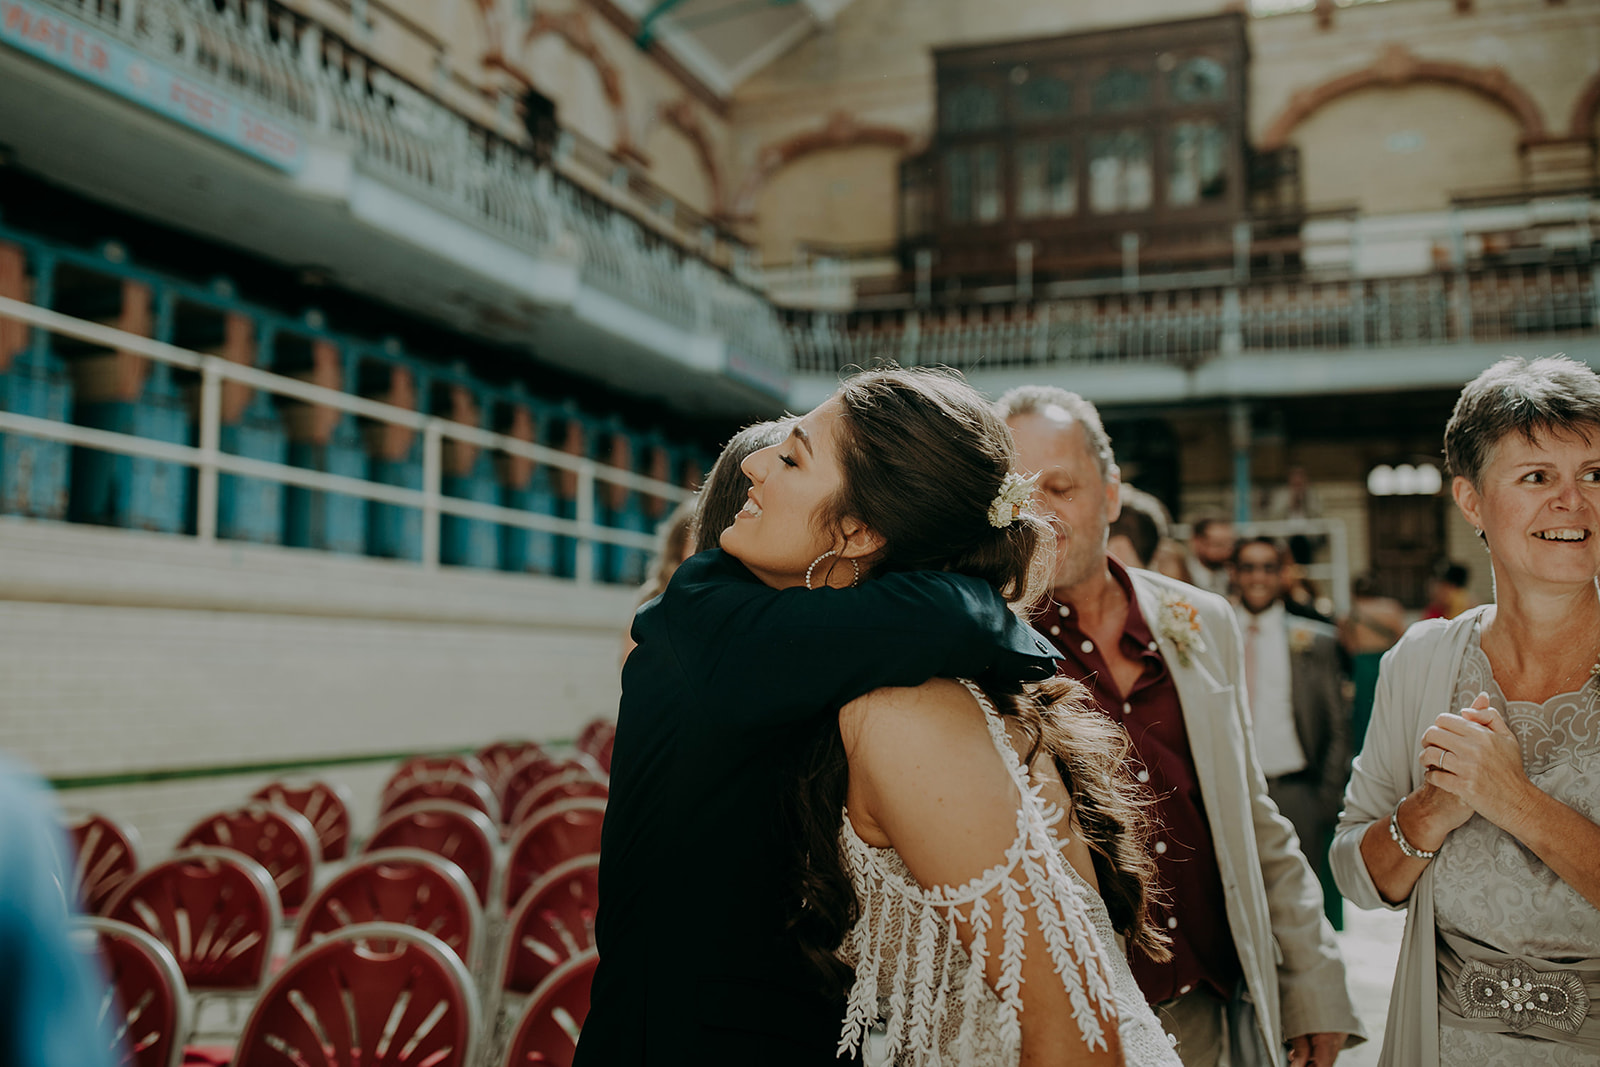 Alternative victoria baths wedding with bride in grace loves lace